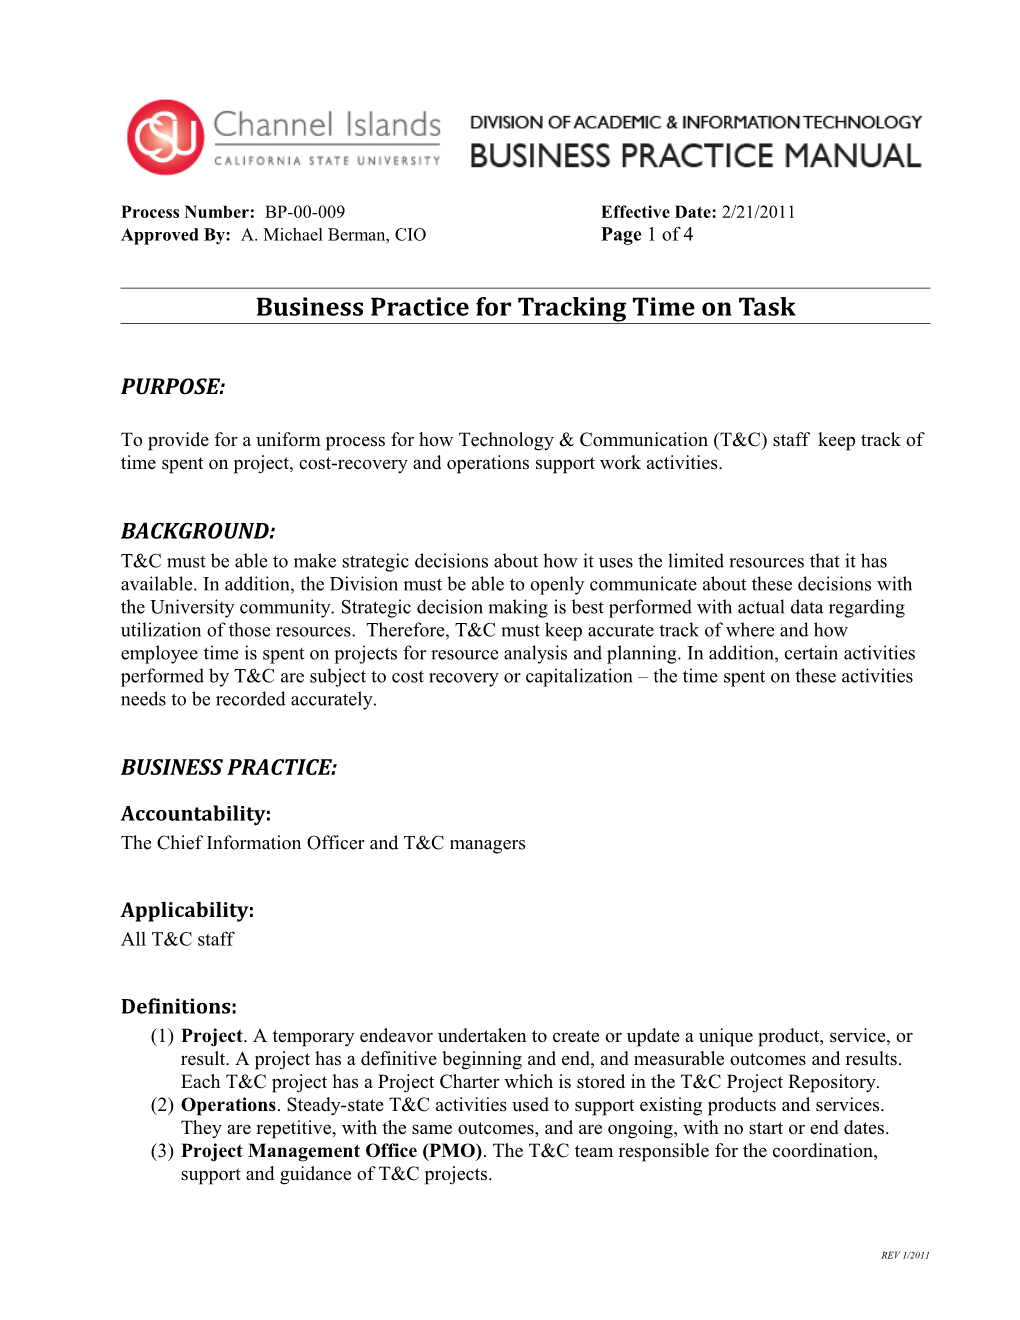 Business Practice for Tracking Time on Task